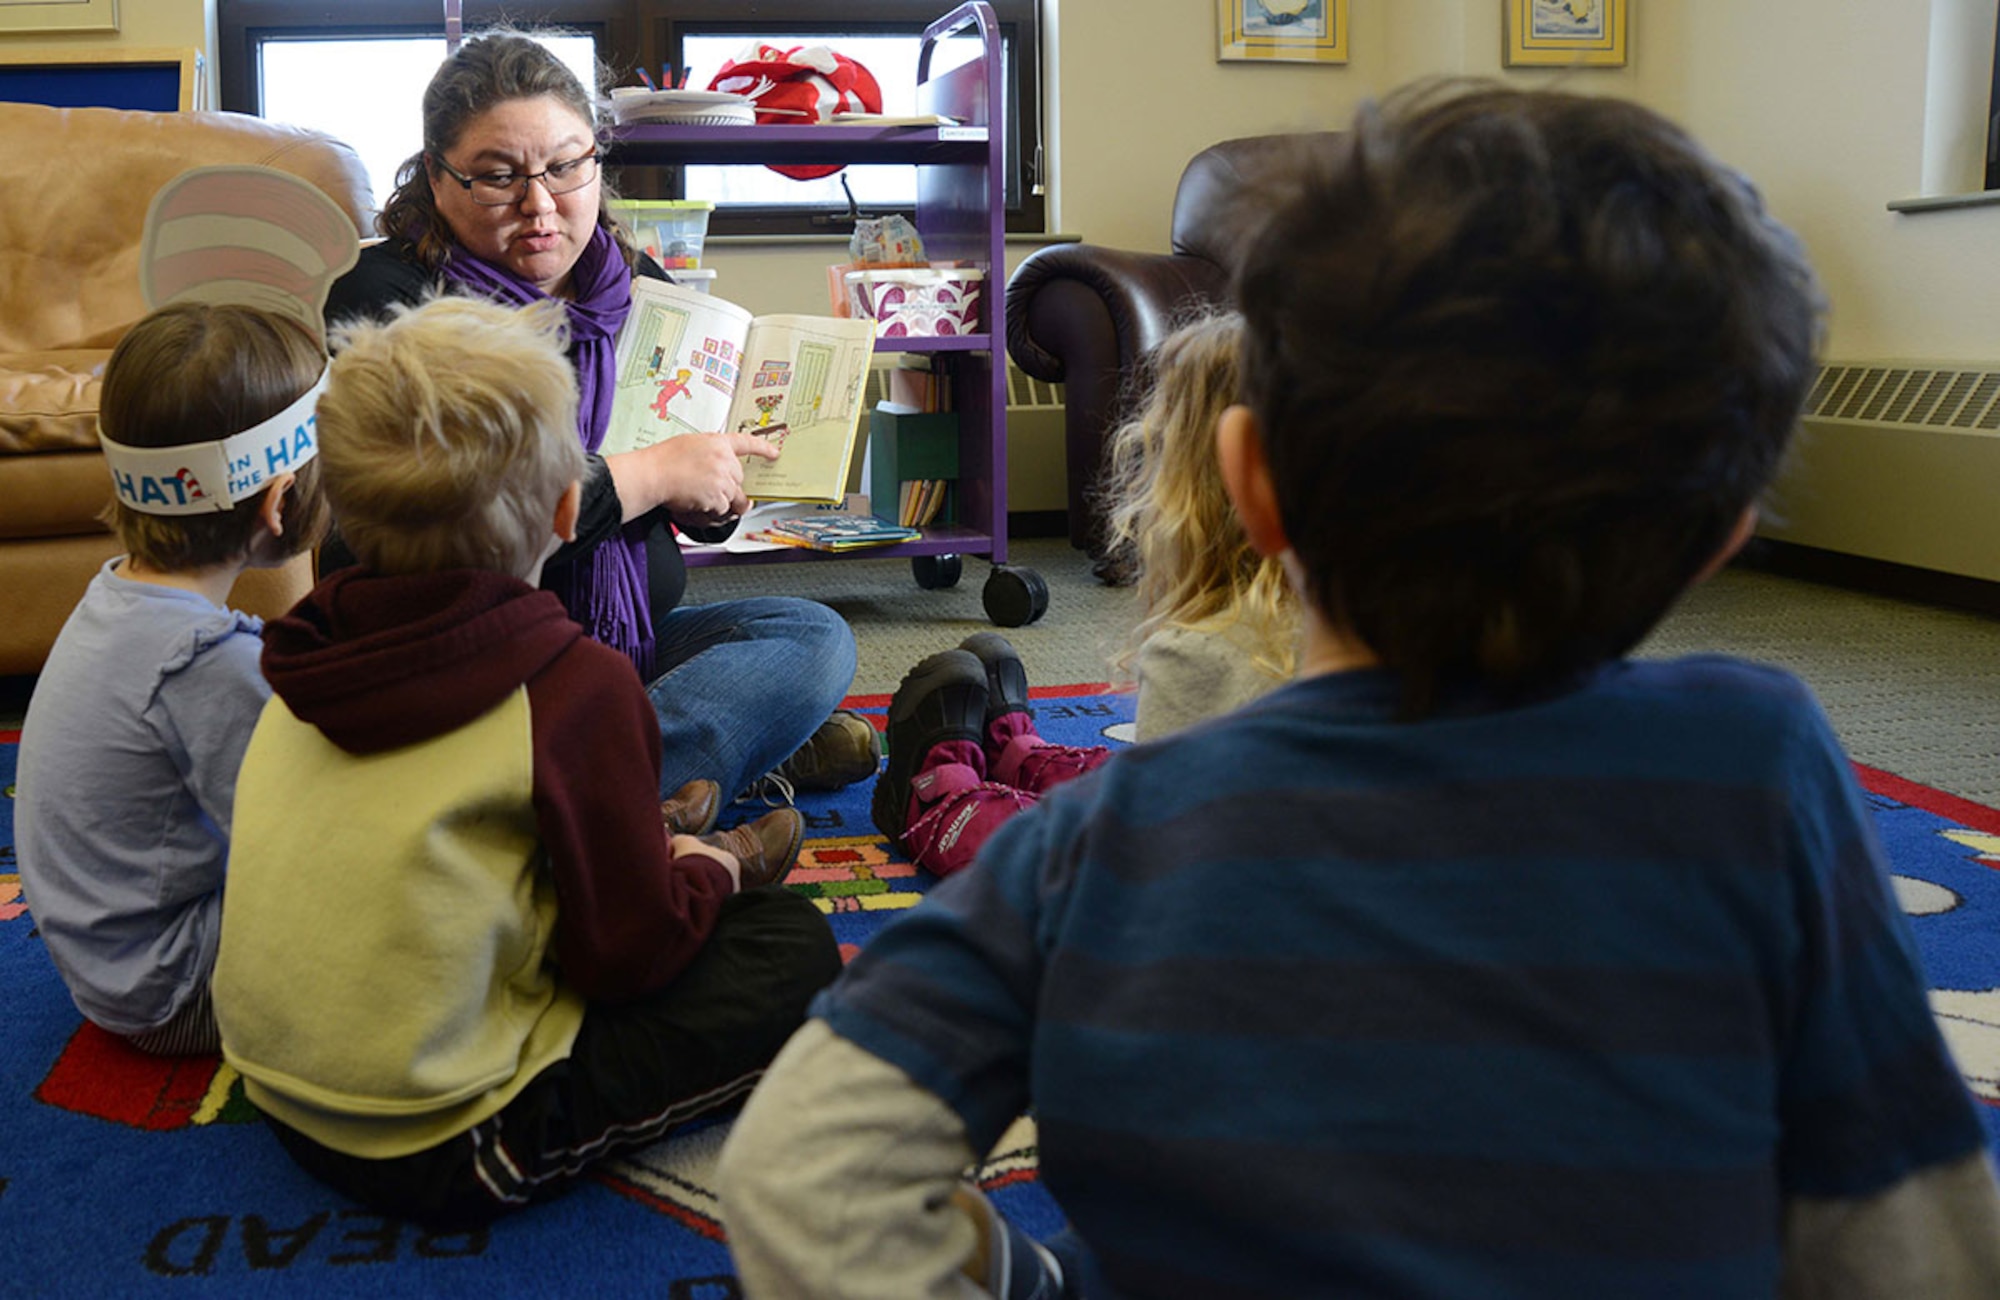 Tesha Mulkey, a 673rd Force Support Squadron library technician, reads to children at the Consolidated Library on March 3, 2015, at Joint Base Elmendorf-Richardson, Alaska. The 673rd FSS earned the Air Force Curtis E. LeMay award for best large installation-level FSS of the year in the Air Force for 2014. (Air Force photo/Airman Christopher R. Morales)